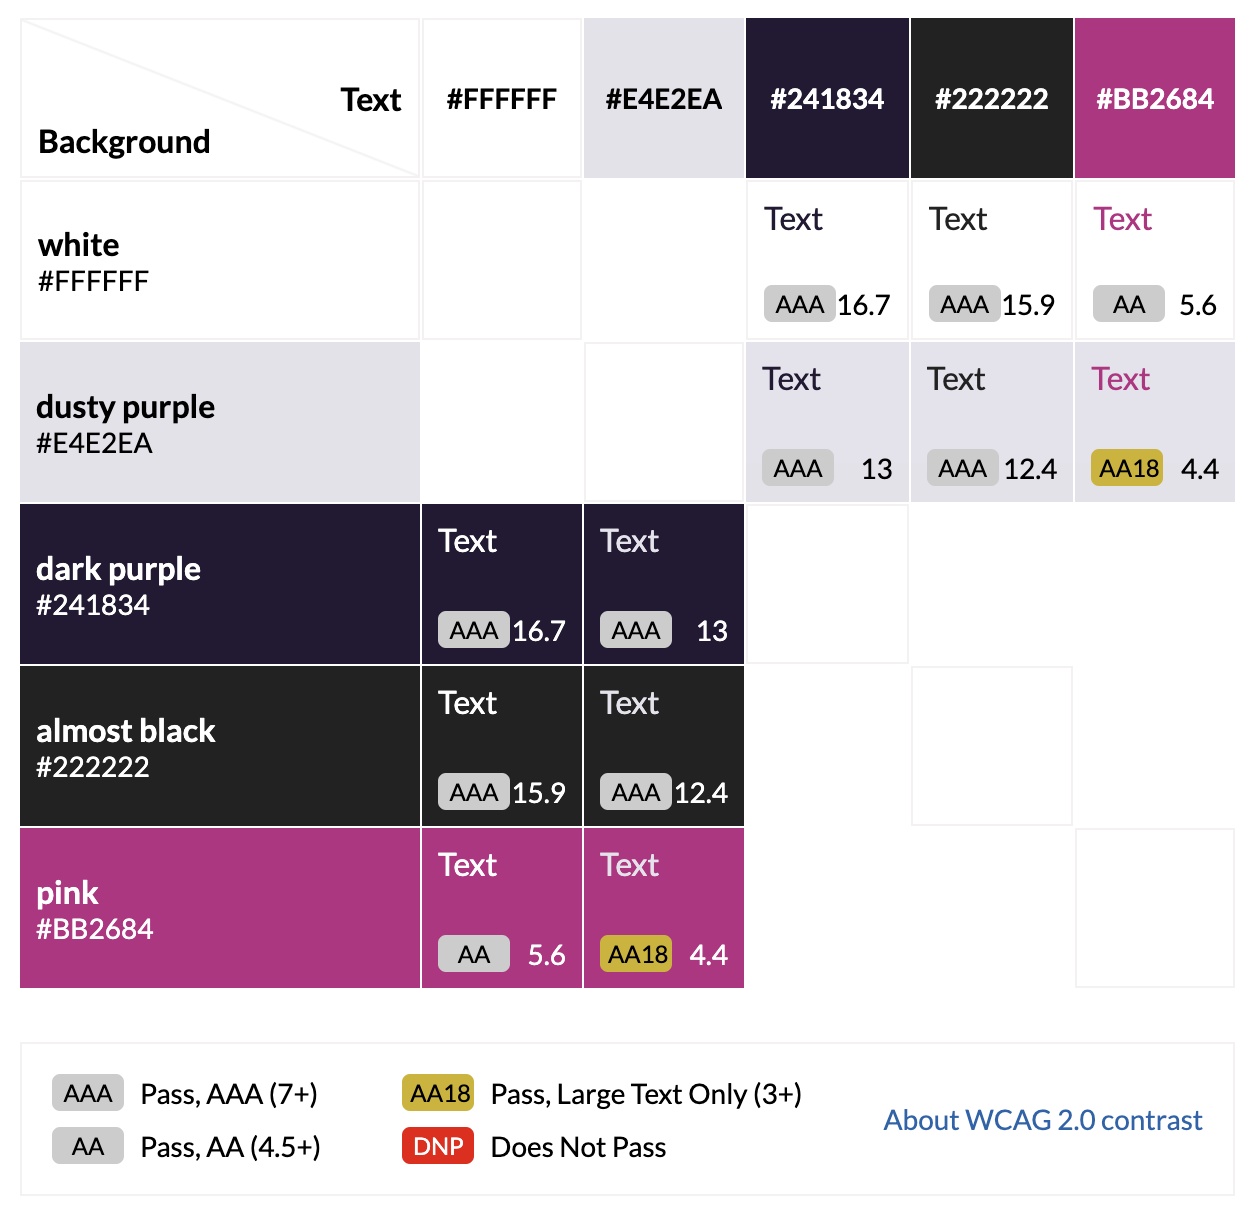 Color contrast grid showing AA and AAA passing for every combination of these colors: #FFFFFF (white), #E4E2Ea (dusty purple), #241834 (dark purple), #222222 ( almost black), #bb2684 (pink).